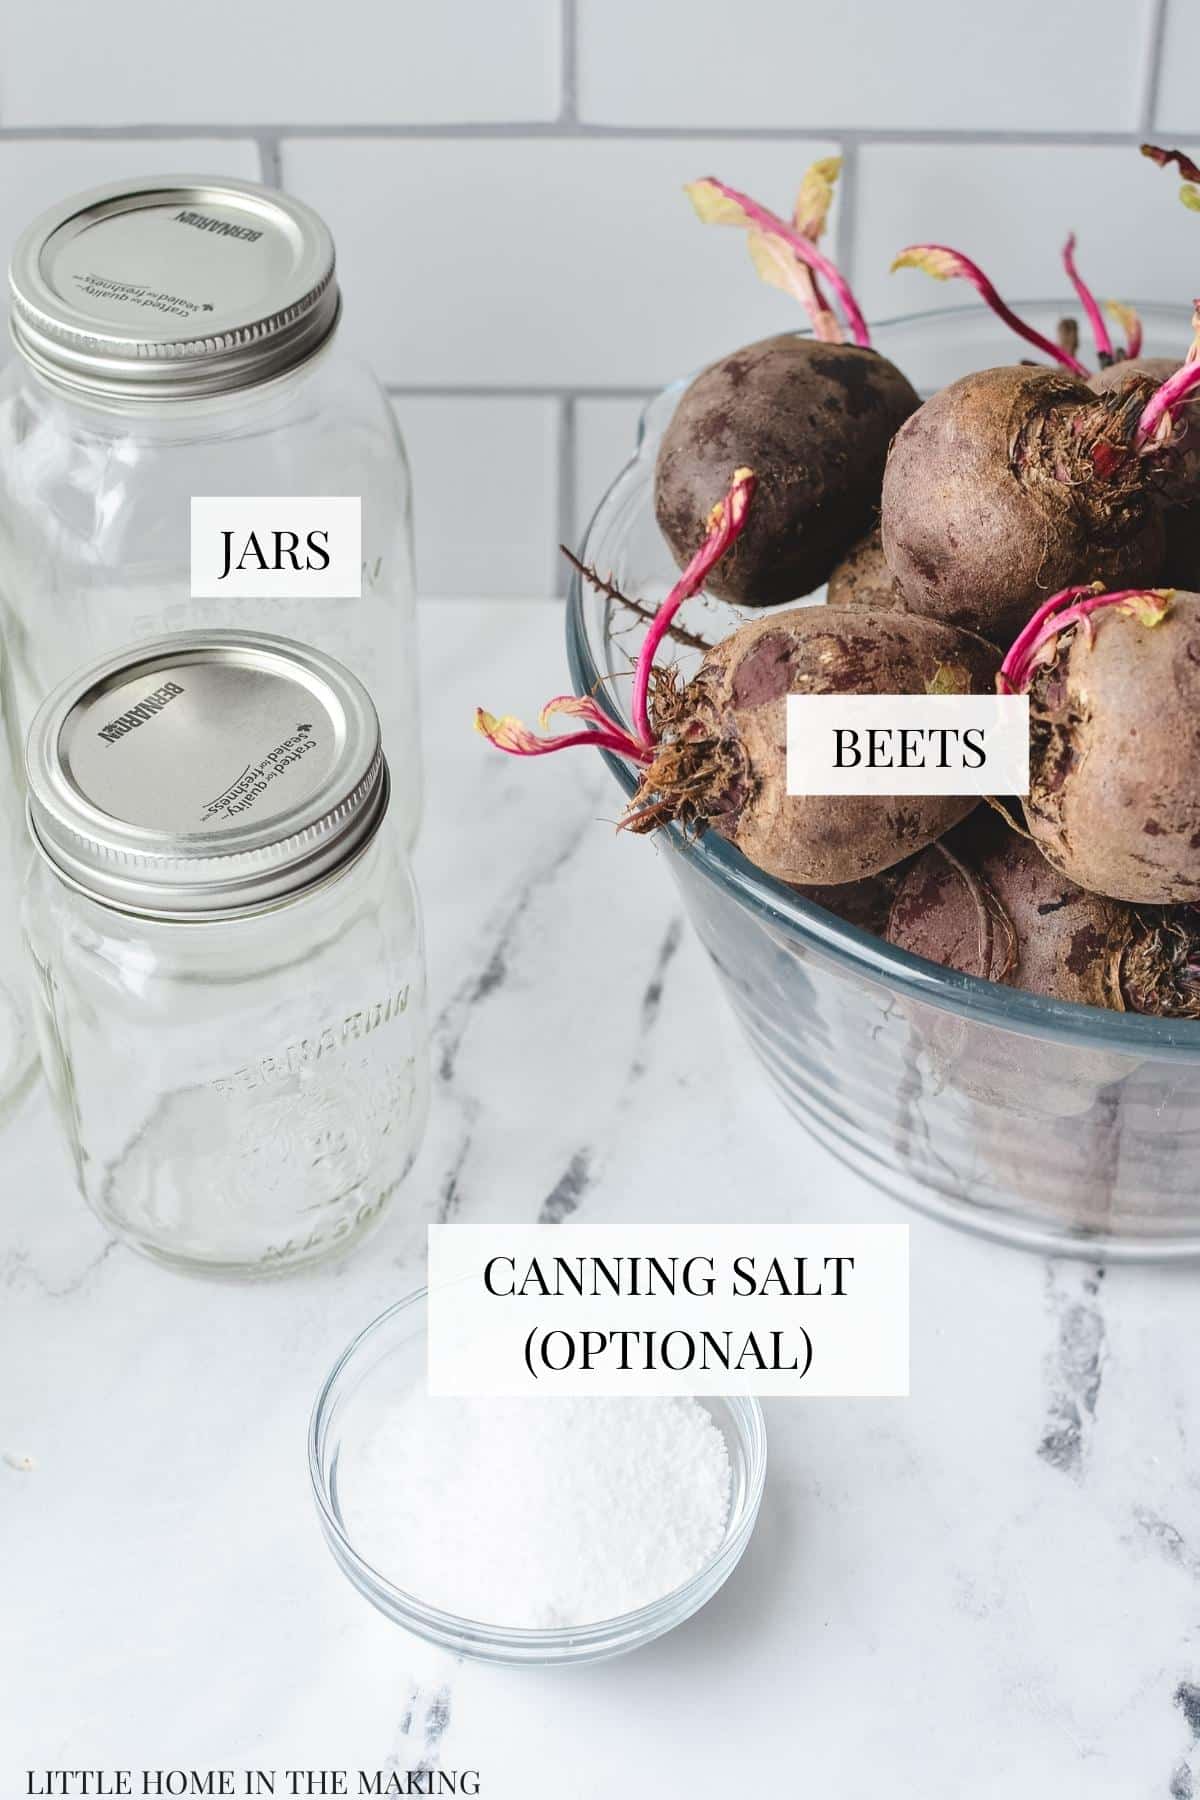 The ingredients need to can beets: jars, salt, water, and beets.